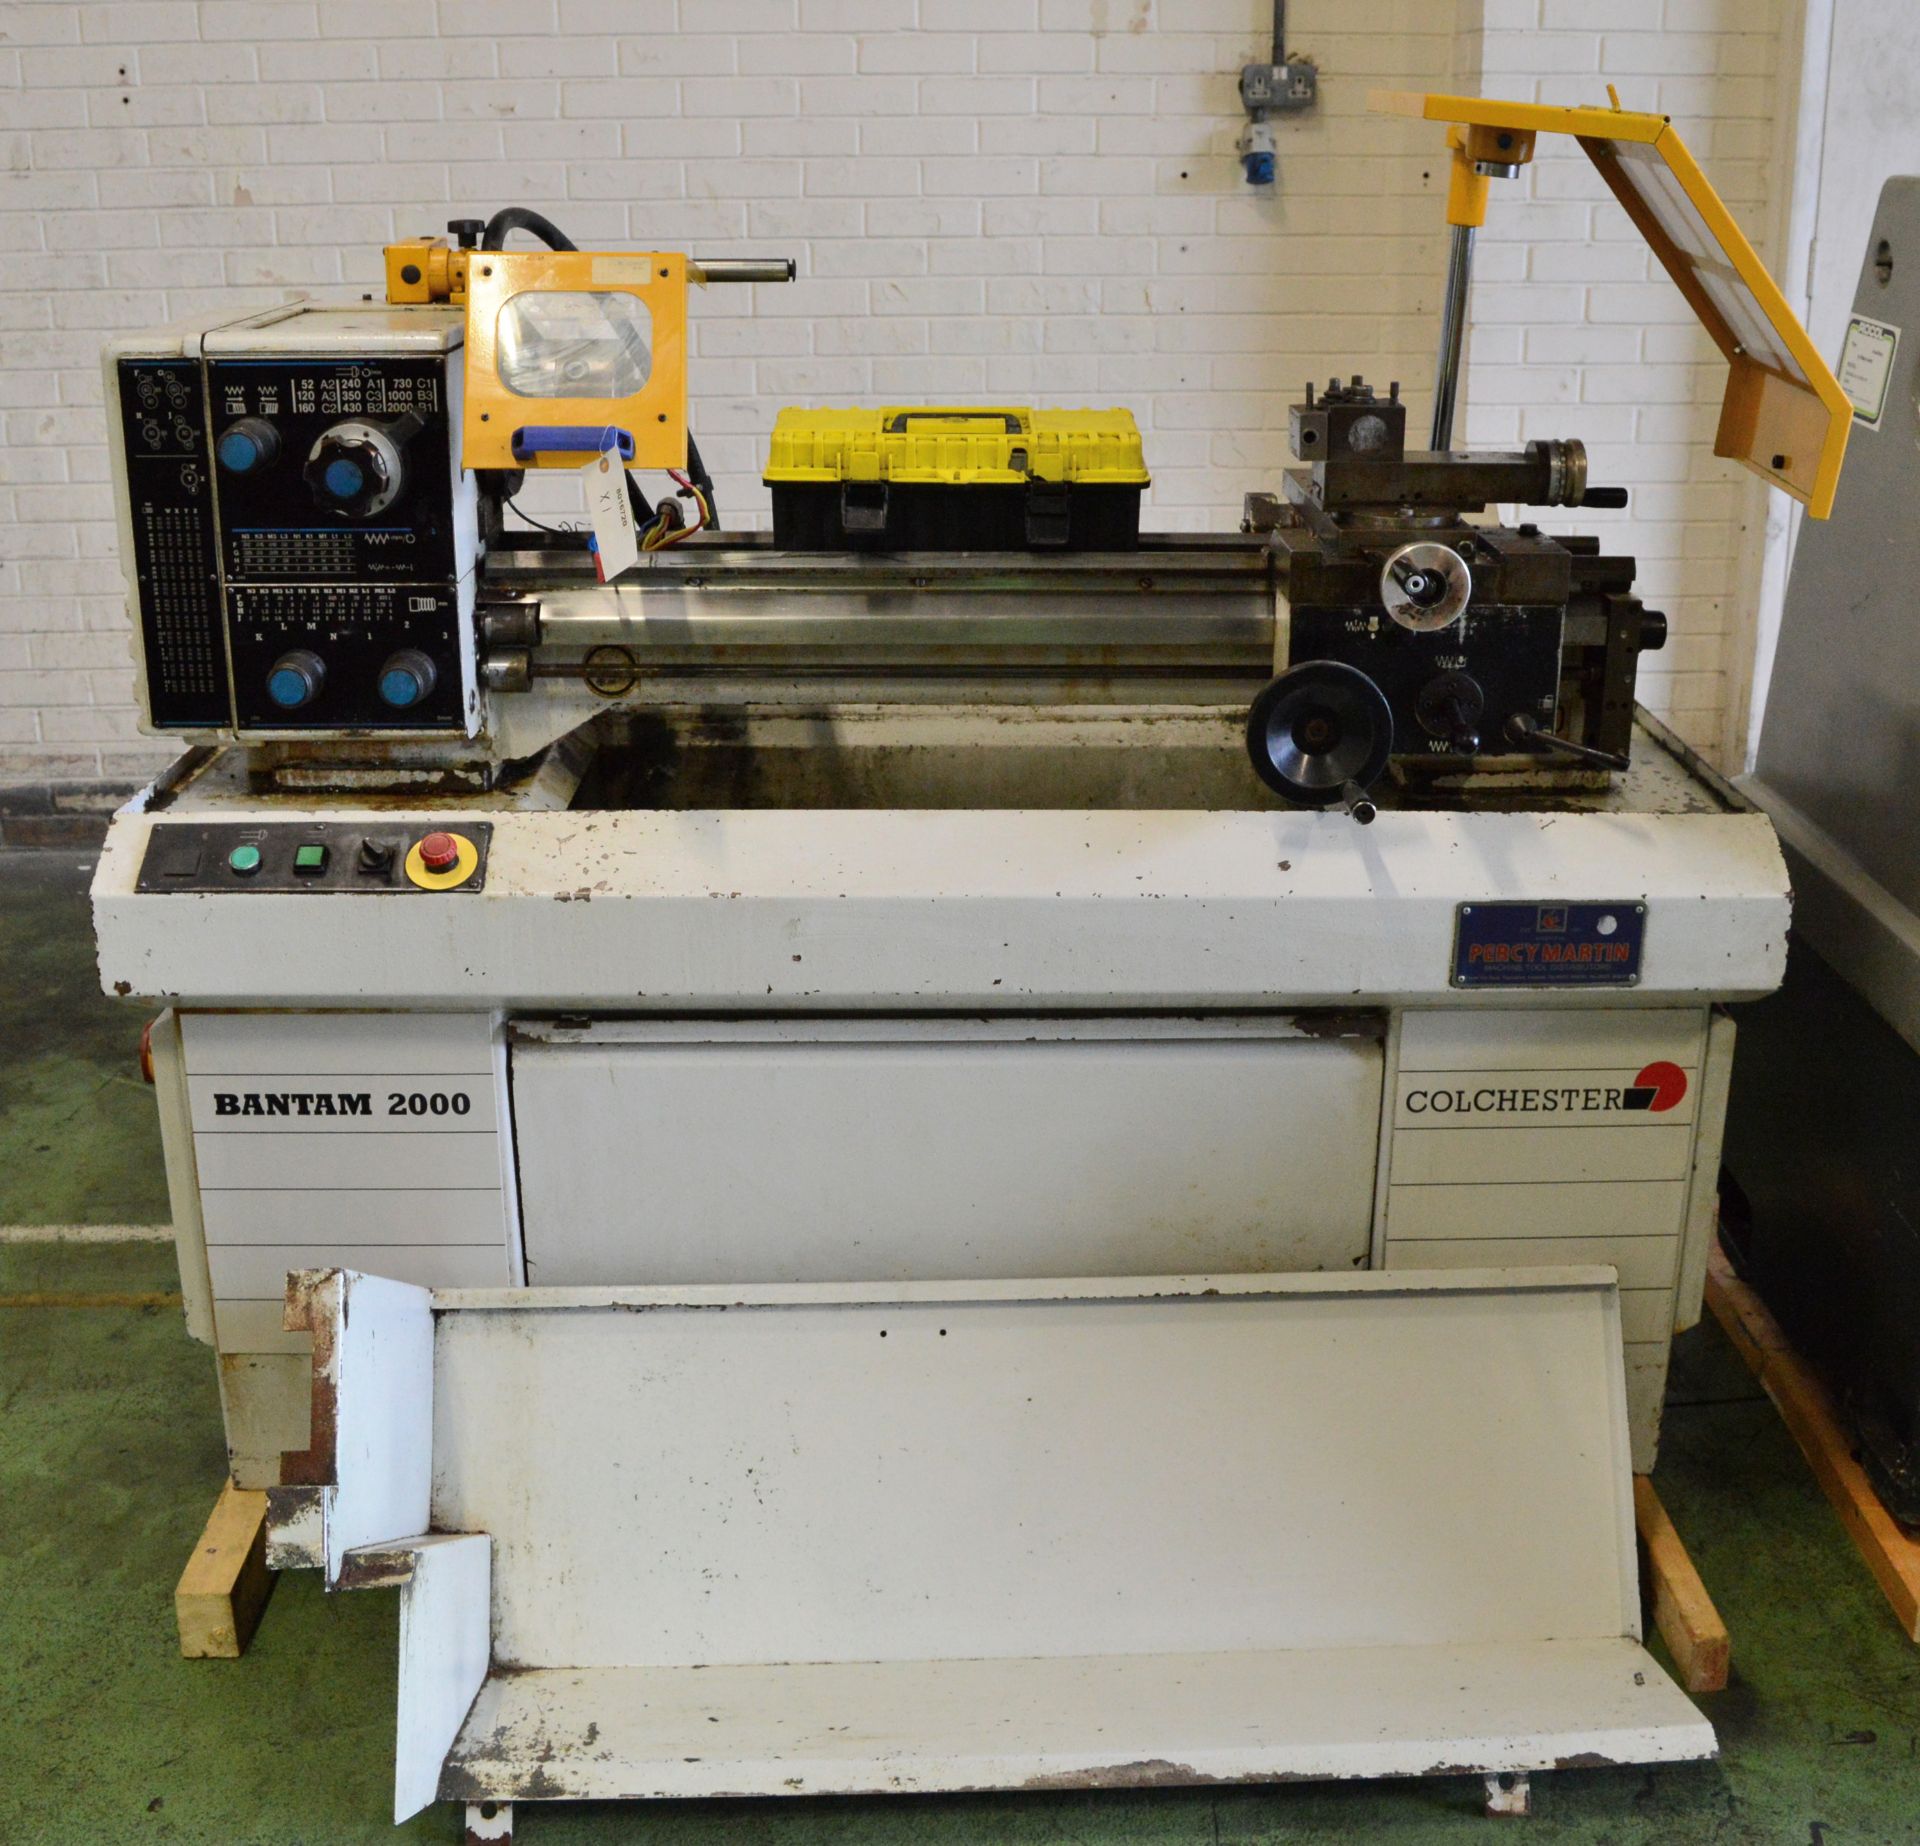 Colchester Bantam 2000 Metalworking Lathe - Approx 30" between centres, swing 5" - 3PH 415